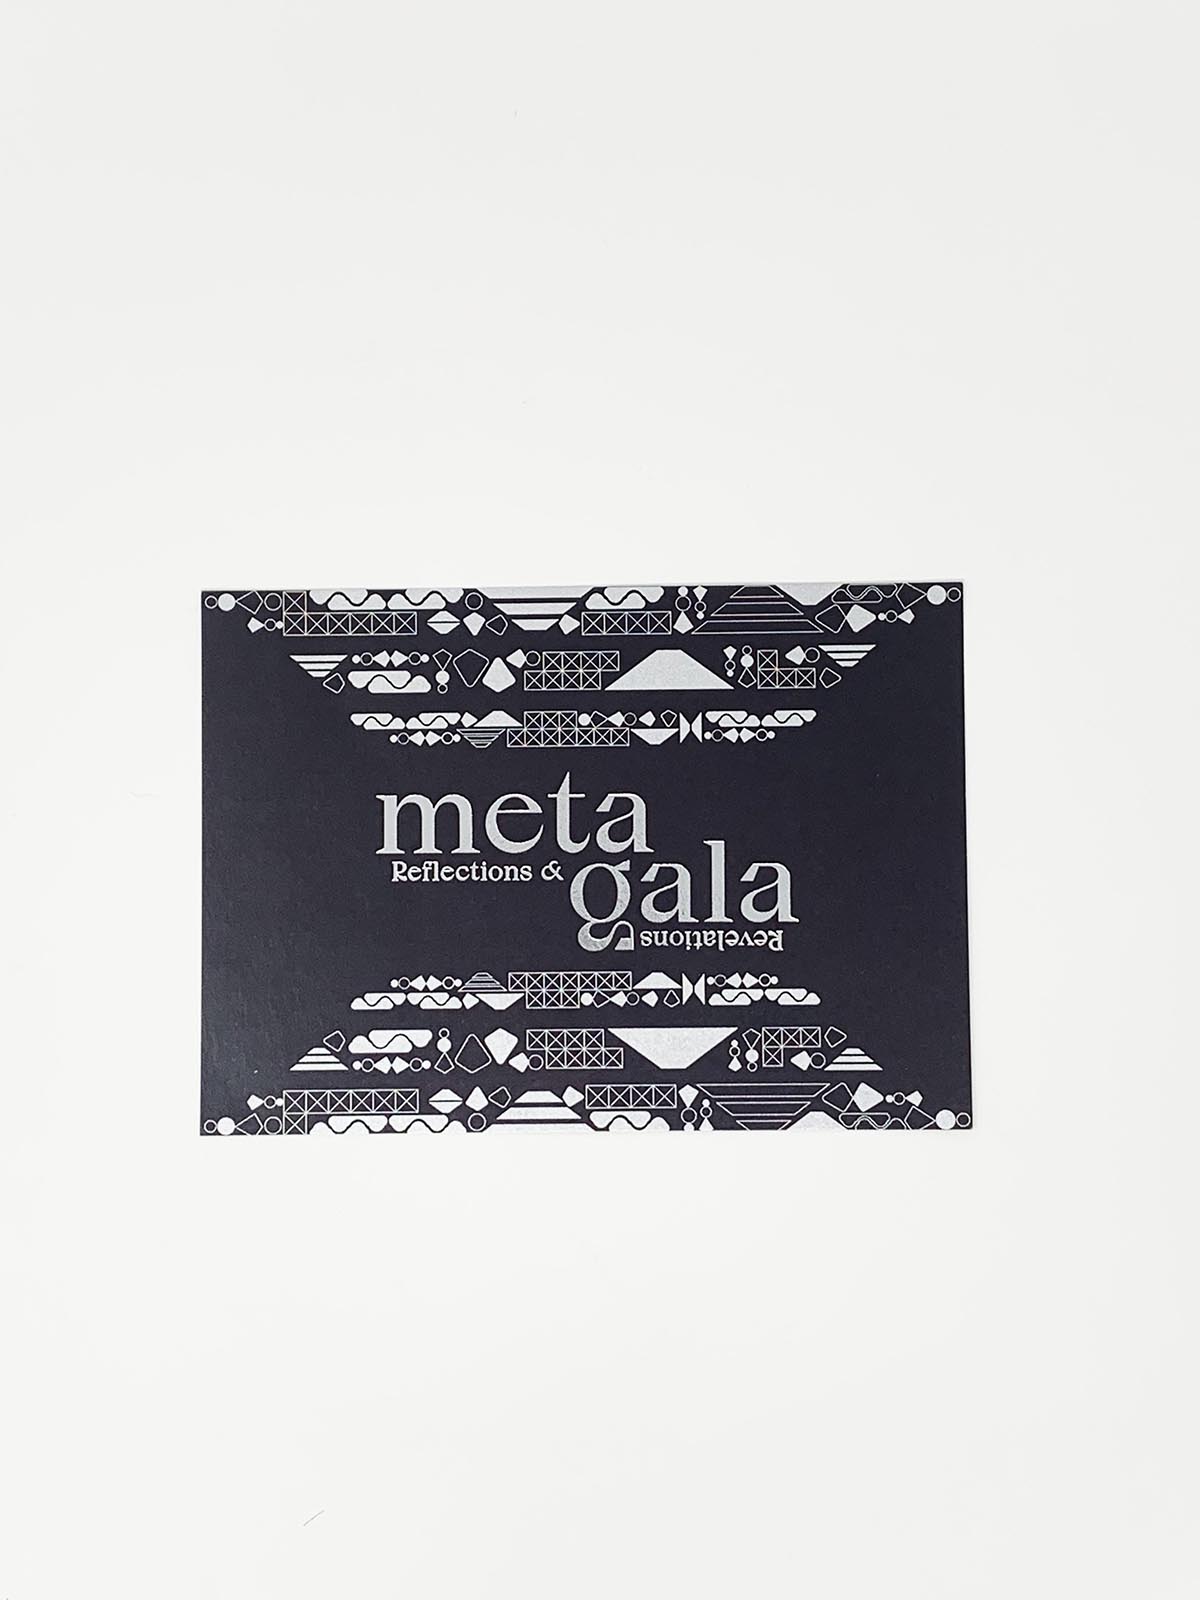 Close up of meta gala black design, says 'reflections & revelations' (with revelations reflected upside down) in small type along with large 'meta gala'.